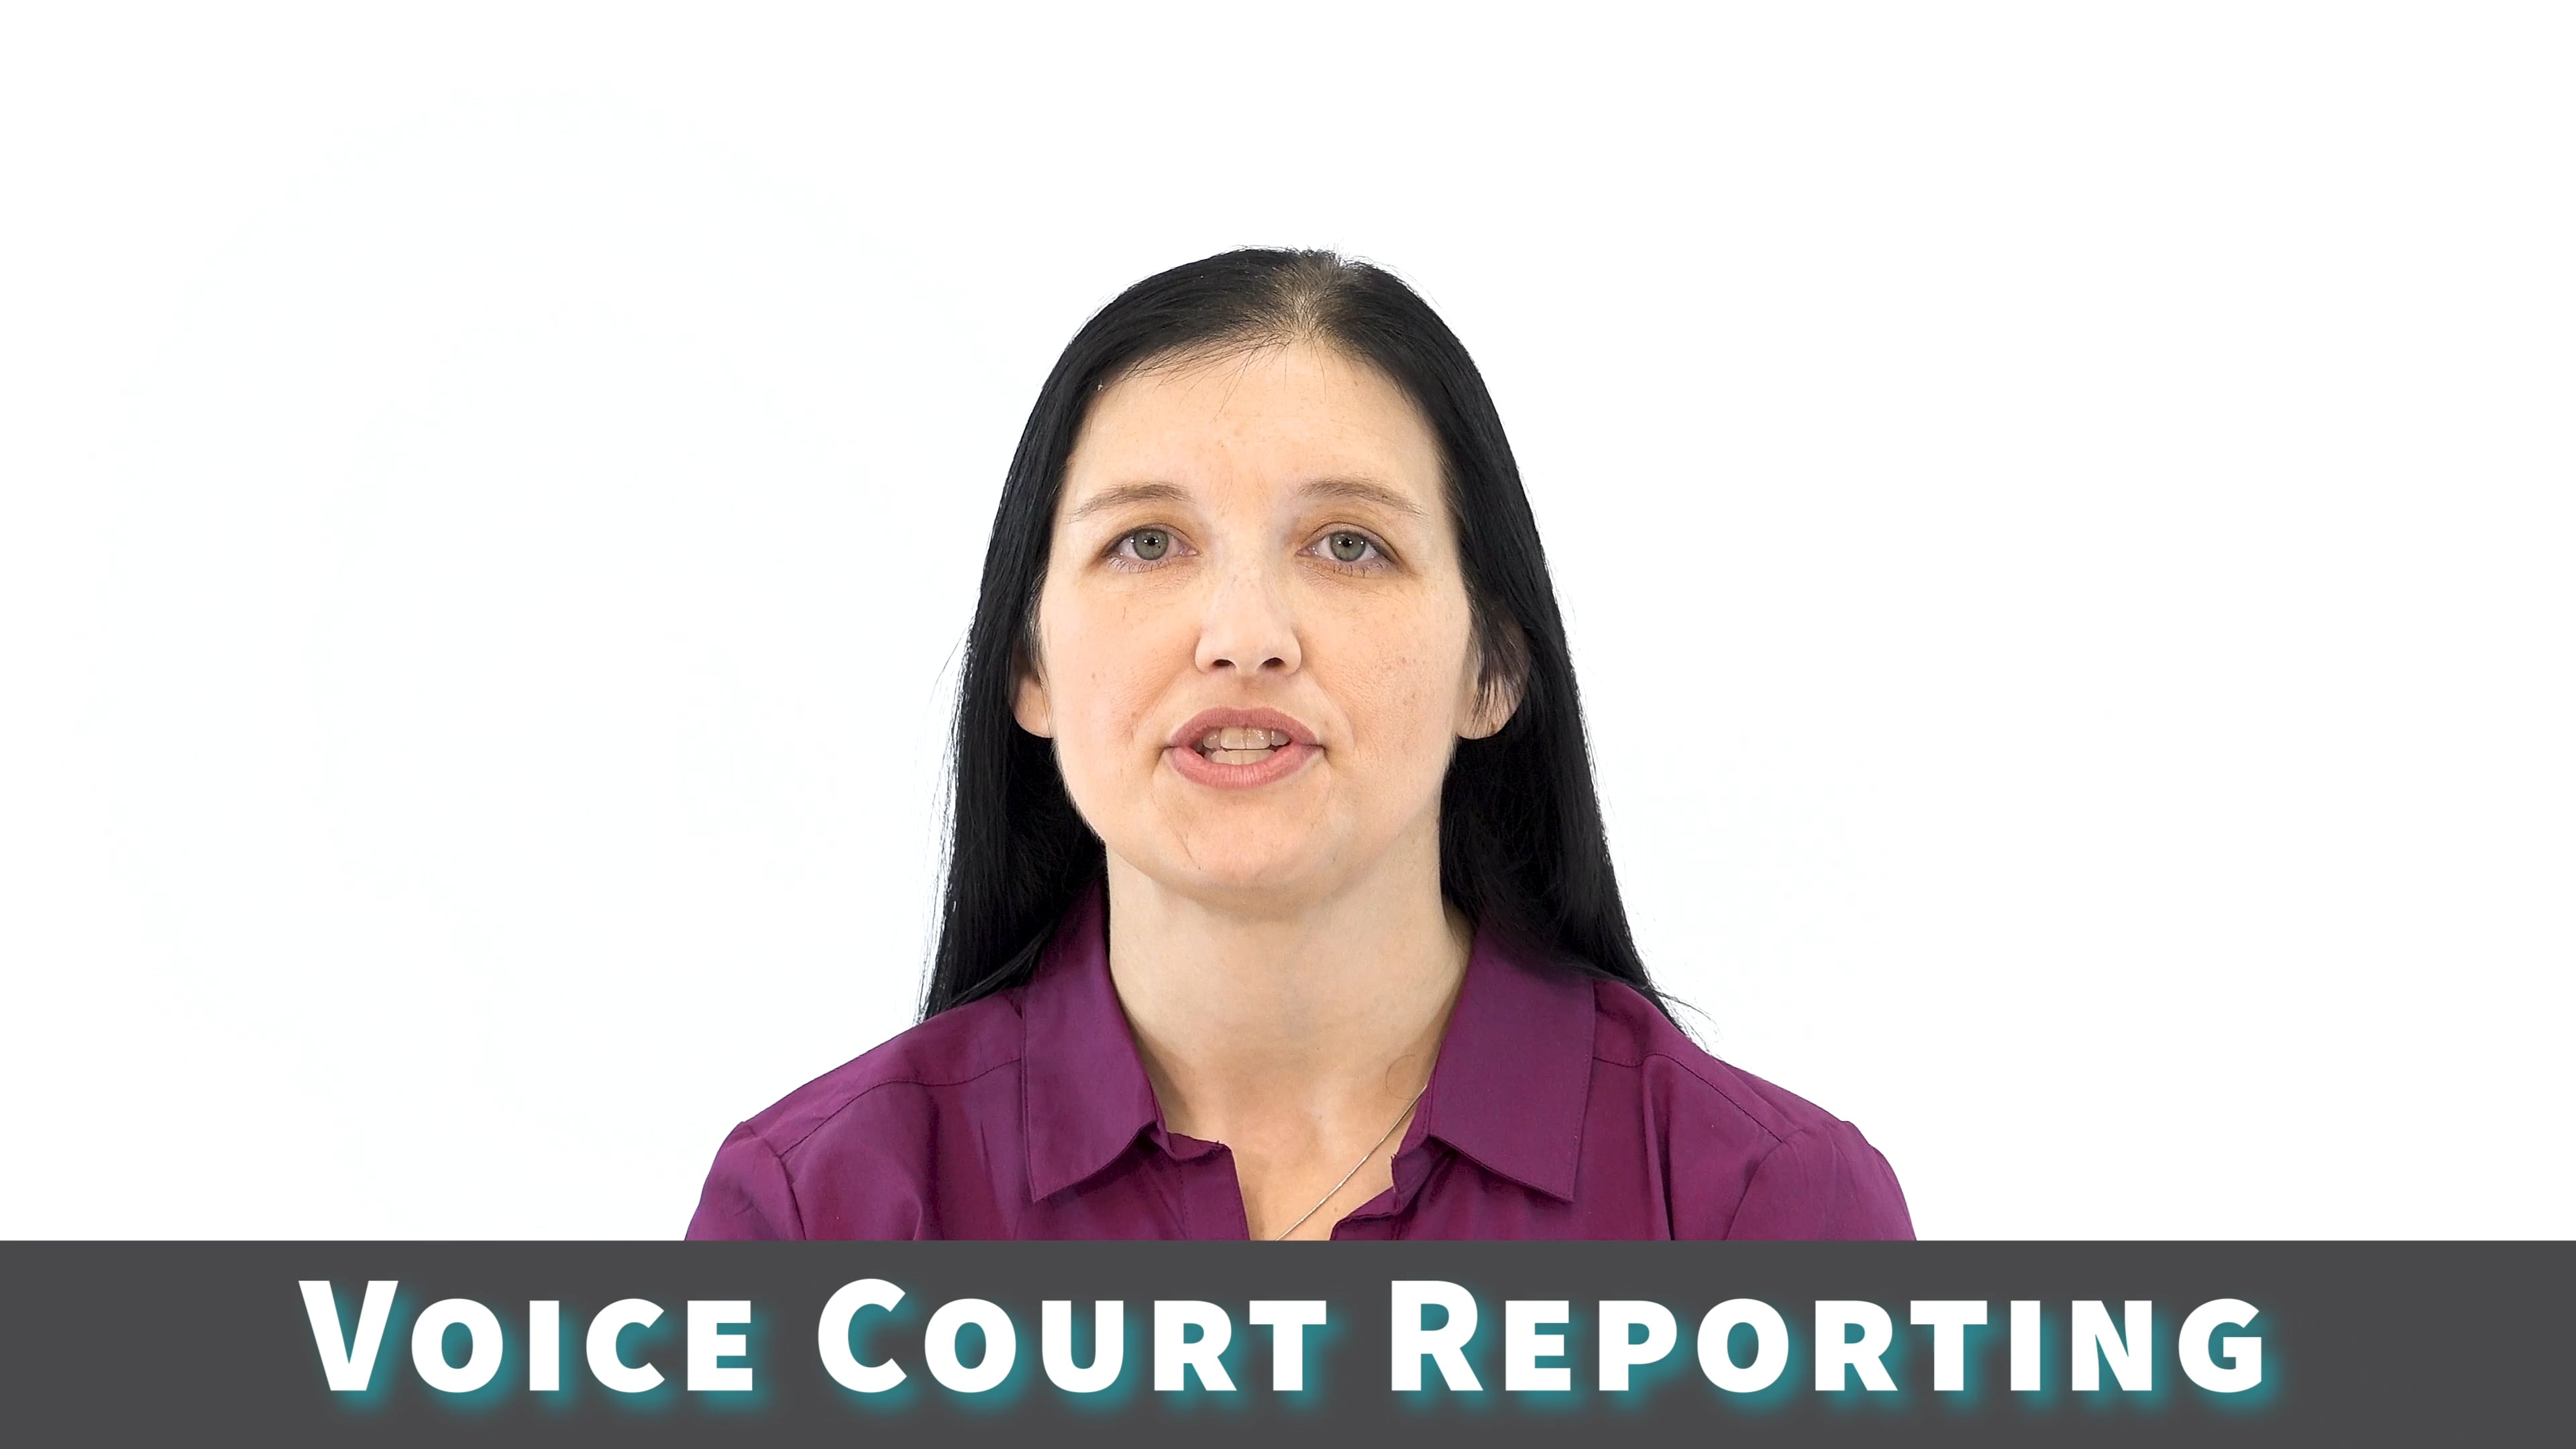 Voice Court Reporting on Vimeo